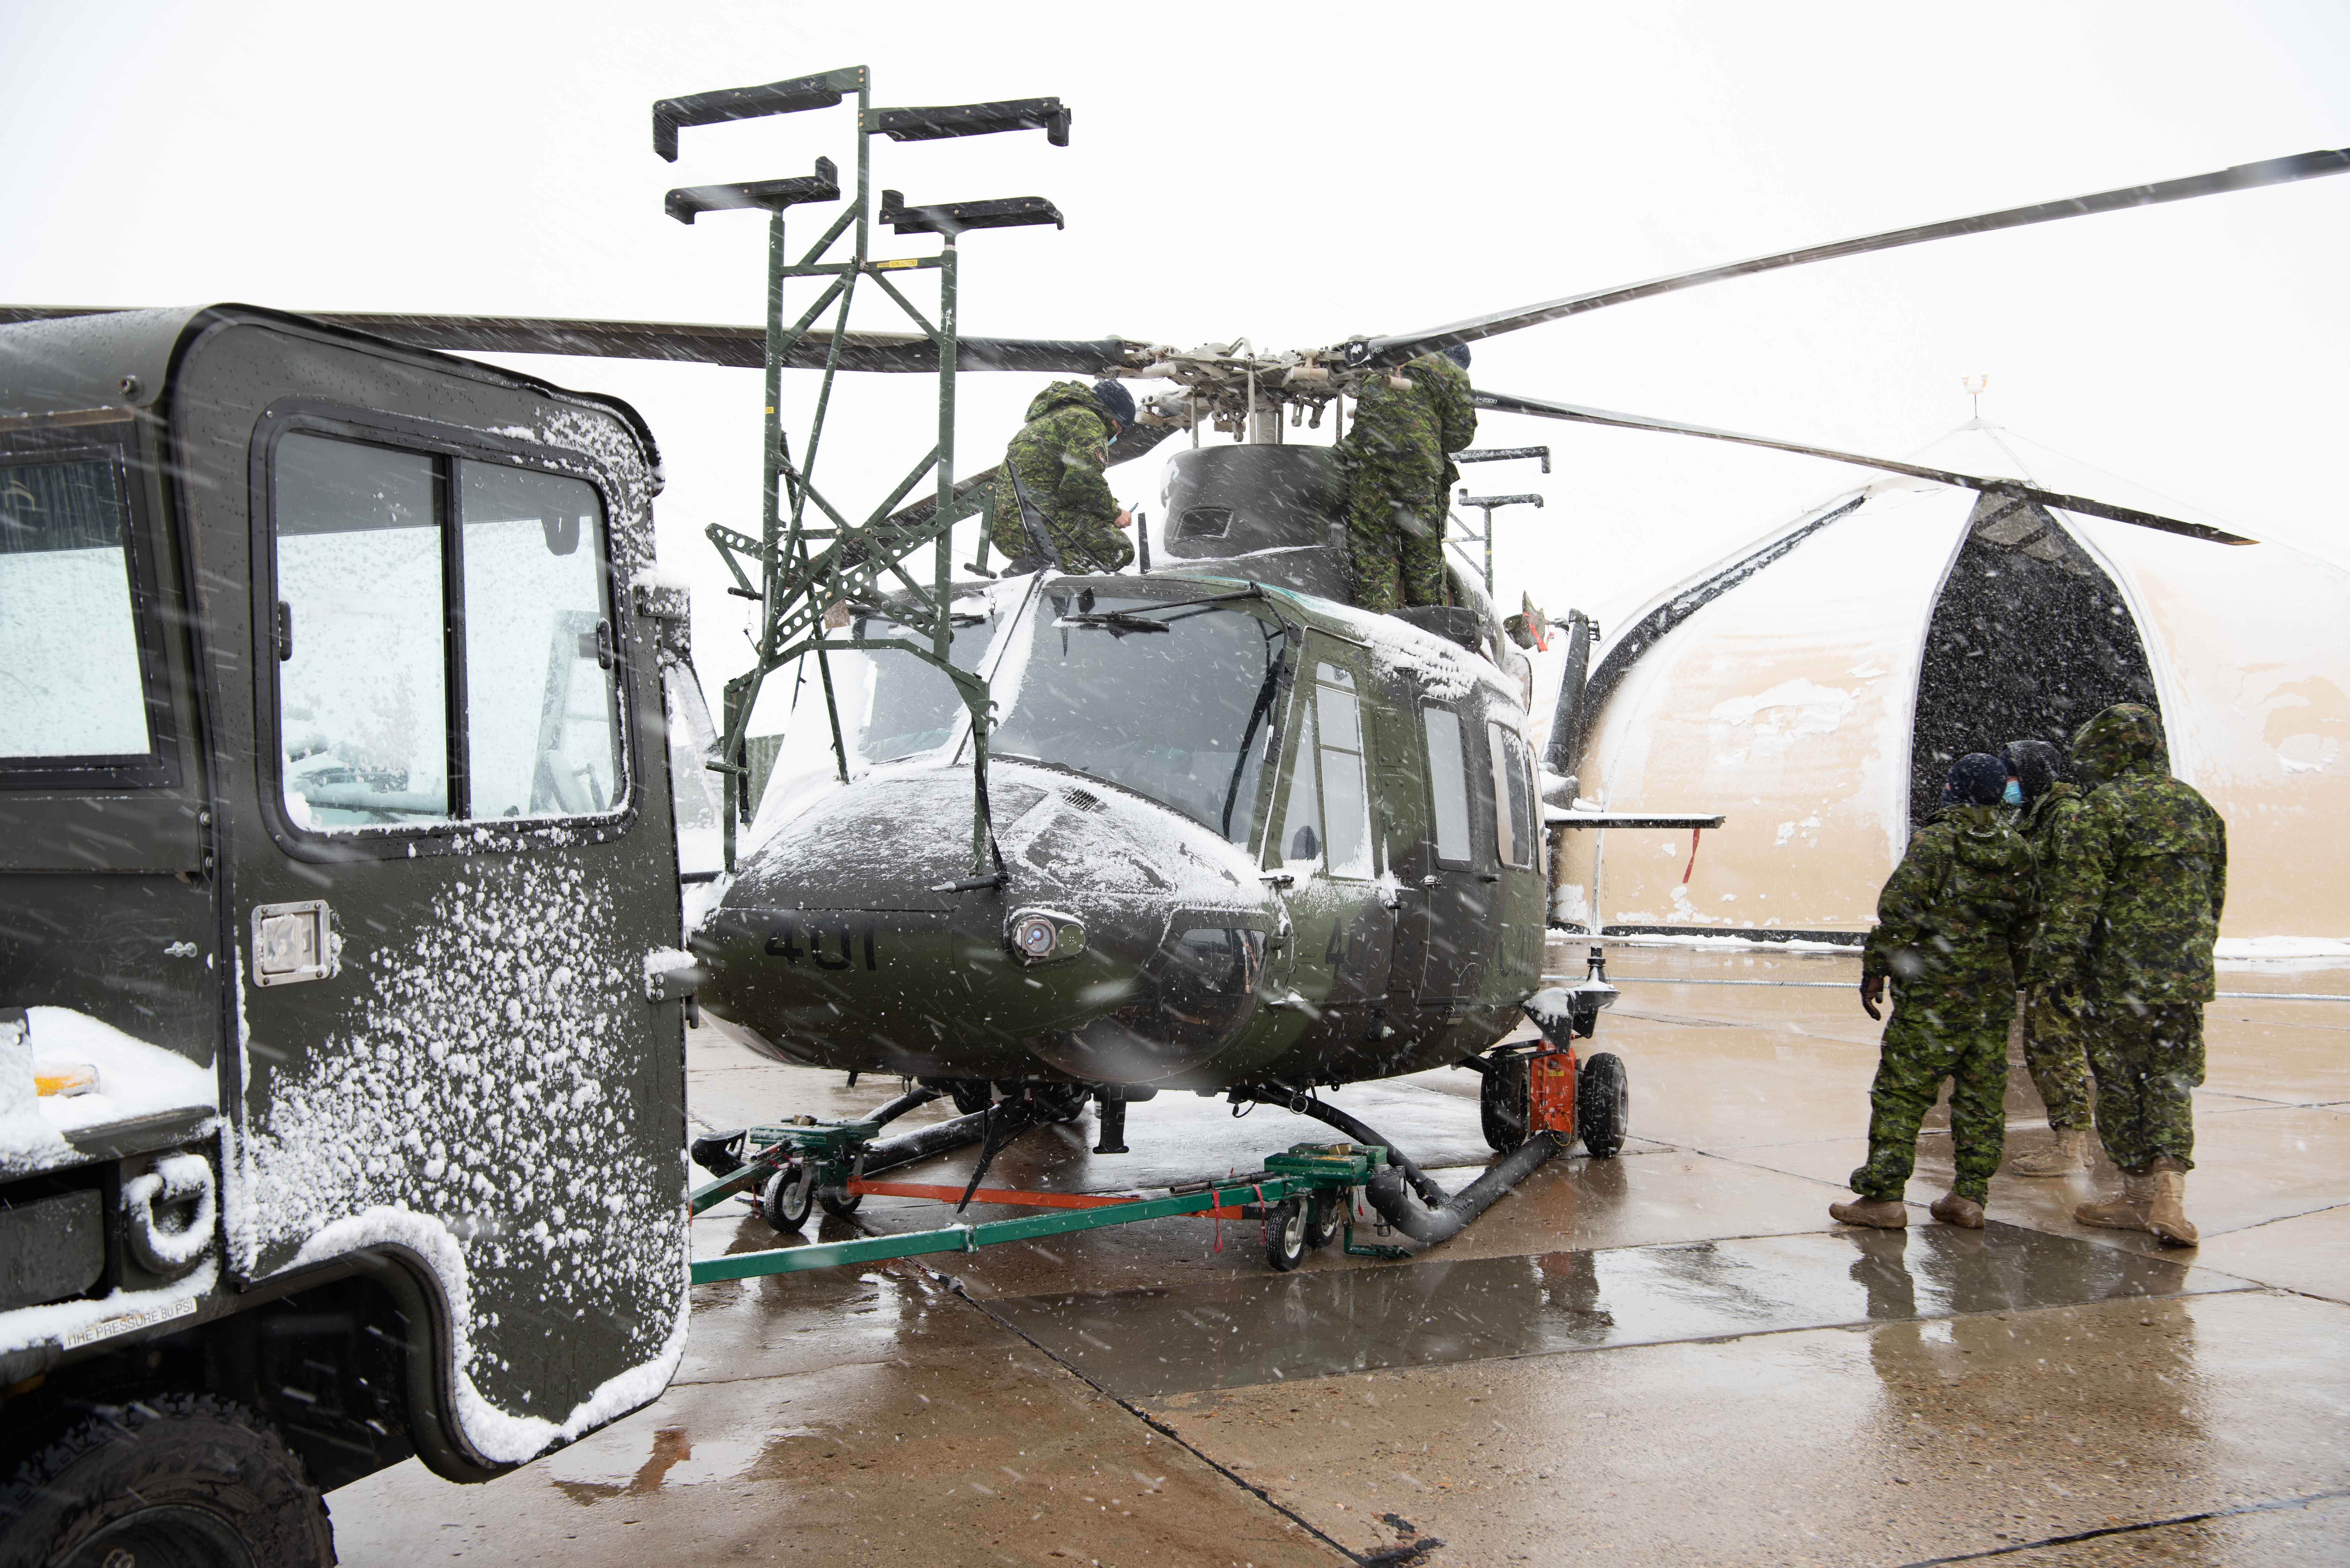 Aircraft technicians from 438 Tactical Helicopter Squadron perform maintenance on a CH-146 Griffon in the snow on May 20, 2021, at CFB Suffield. PHOTO: Cpl Laura Landry